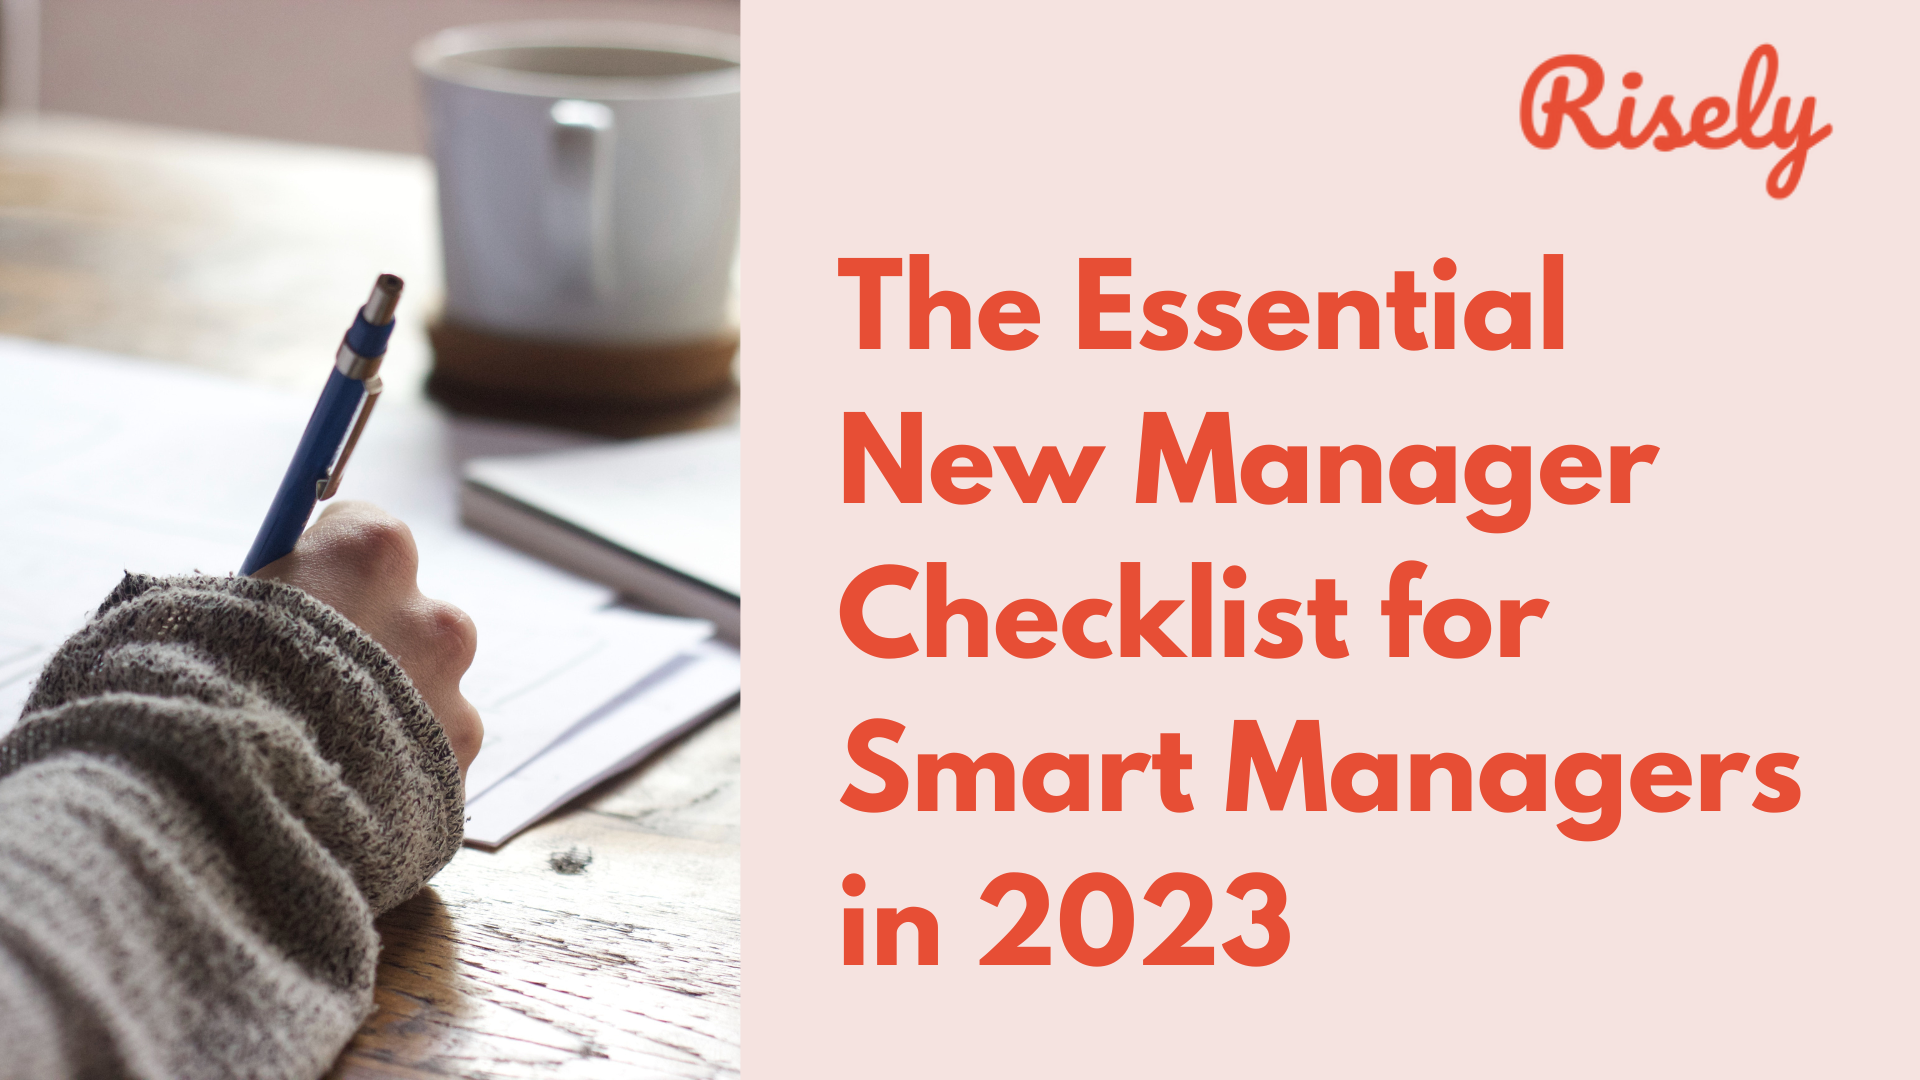 The Essential New Manager Checklist for Smart Managers in 2023